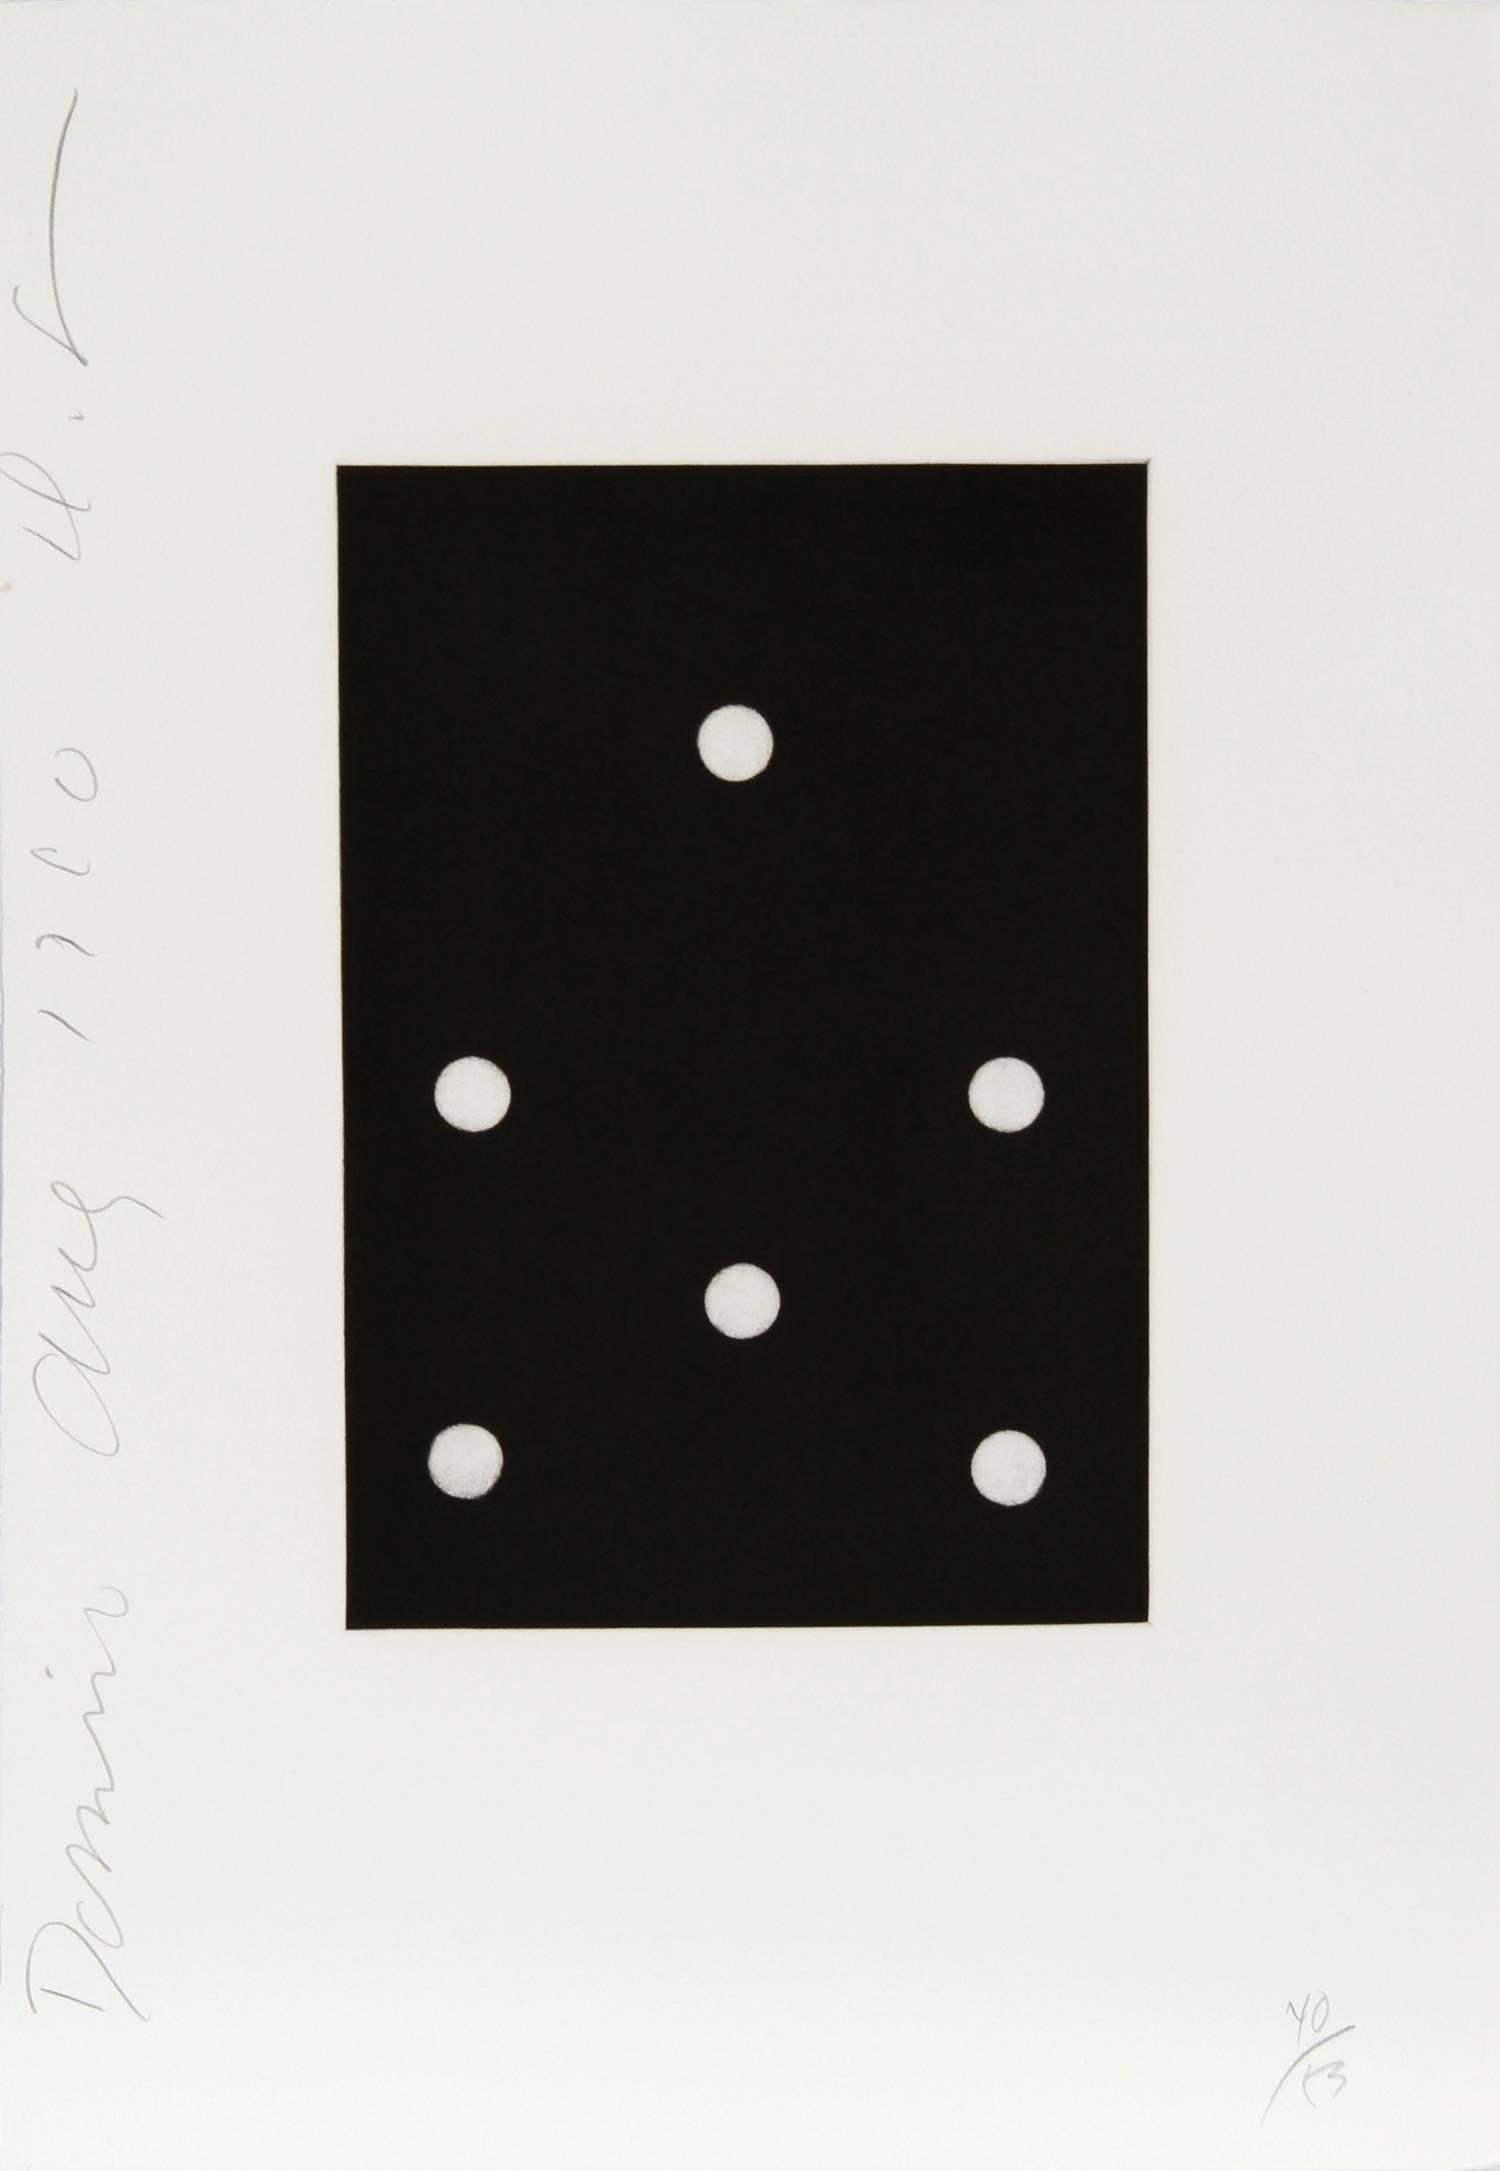 Donald Sultan Abstract Print - 17 from the Dominoes Portfolio, Aquatint Etching, 1990